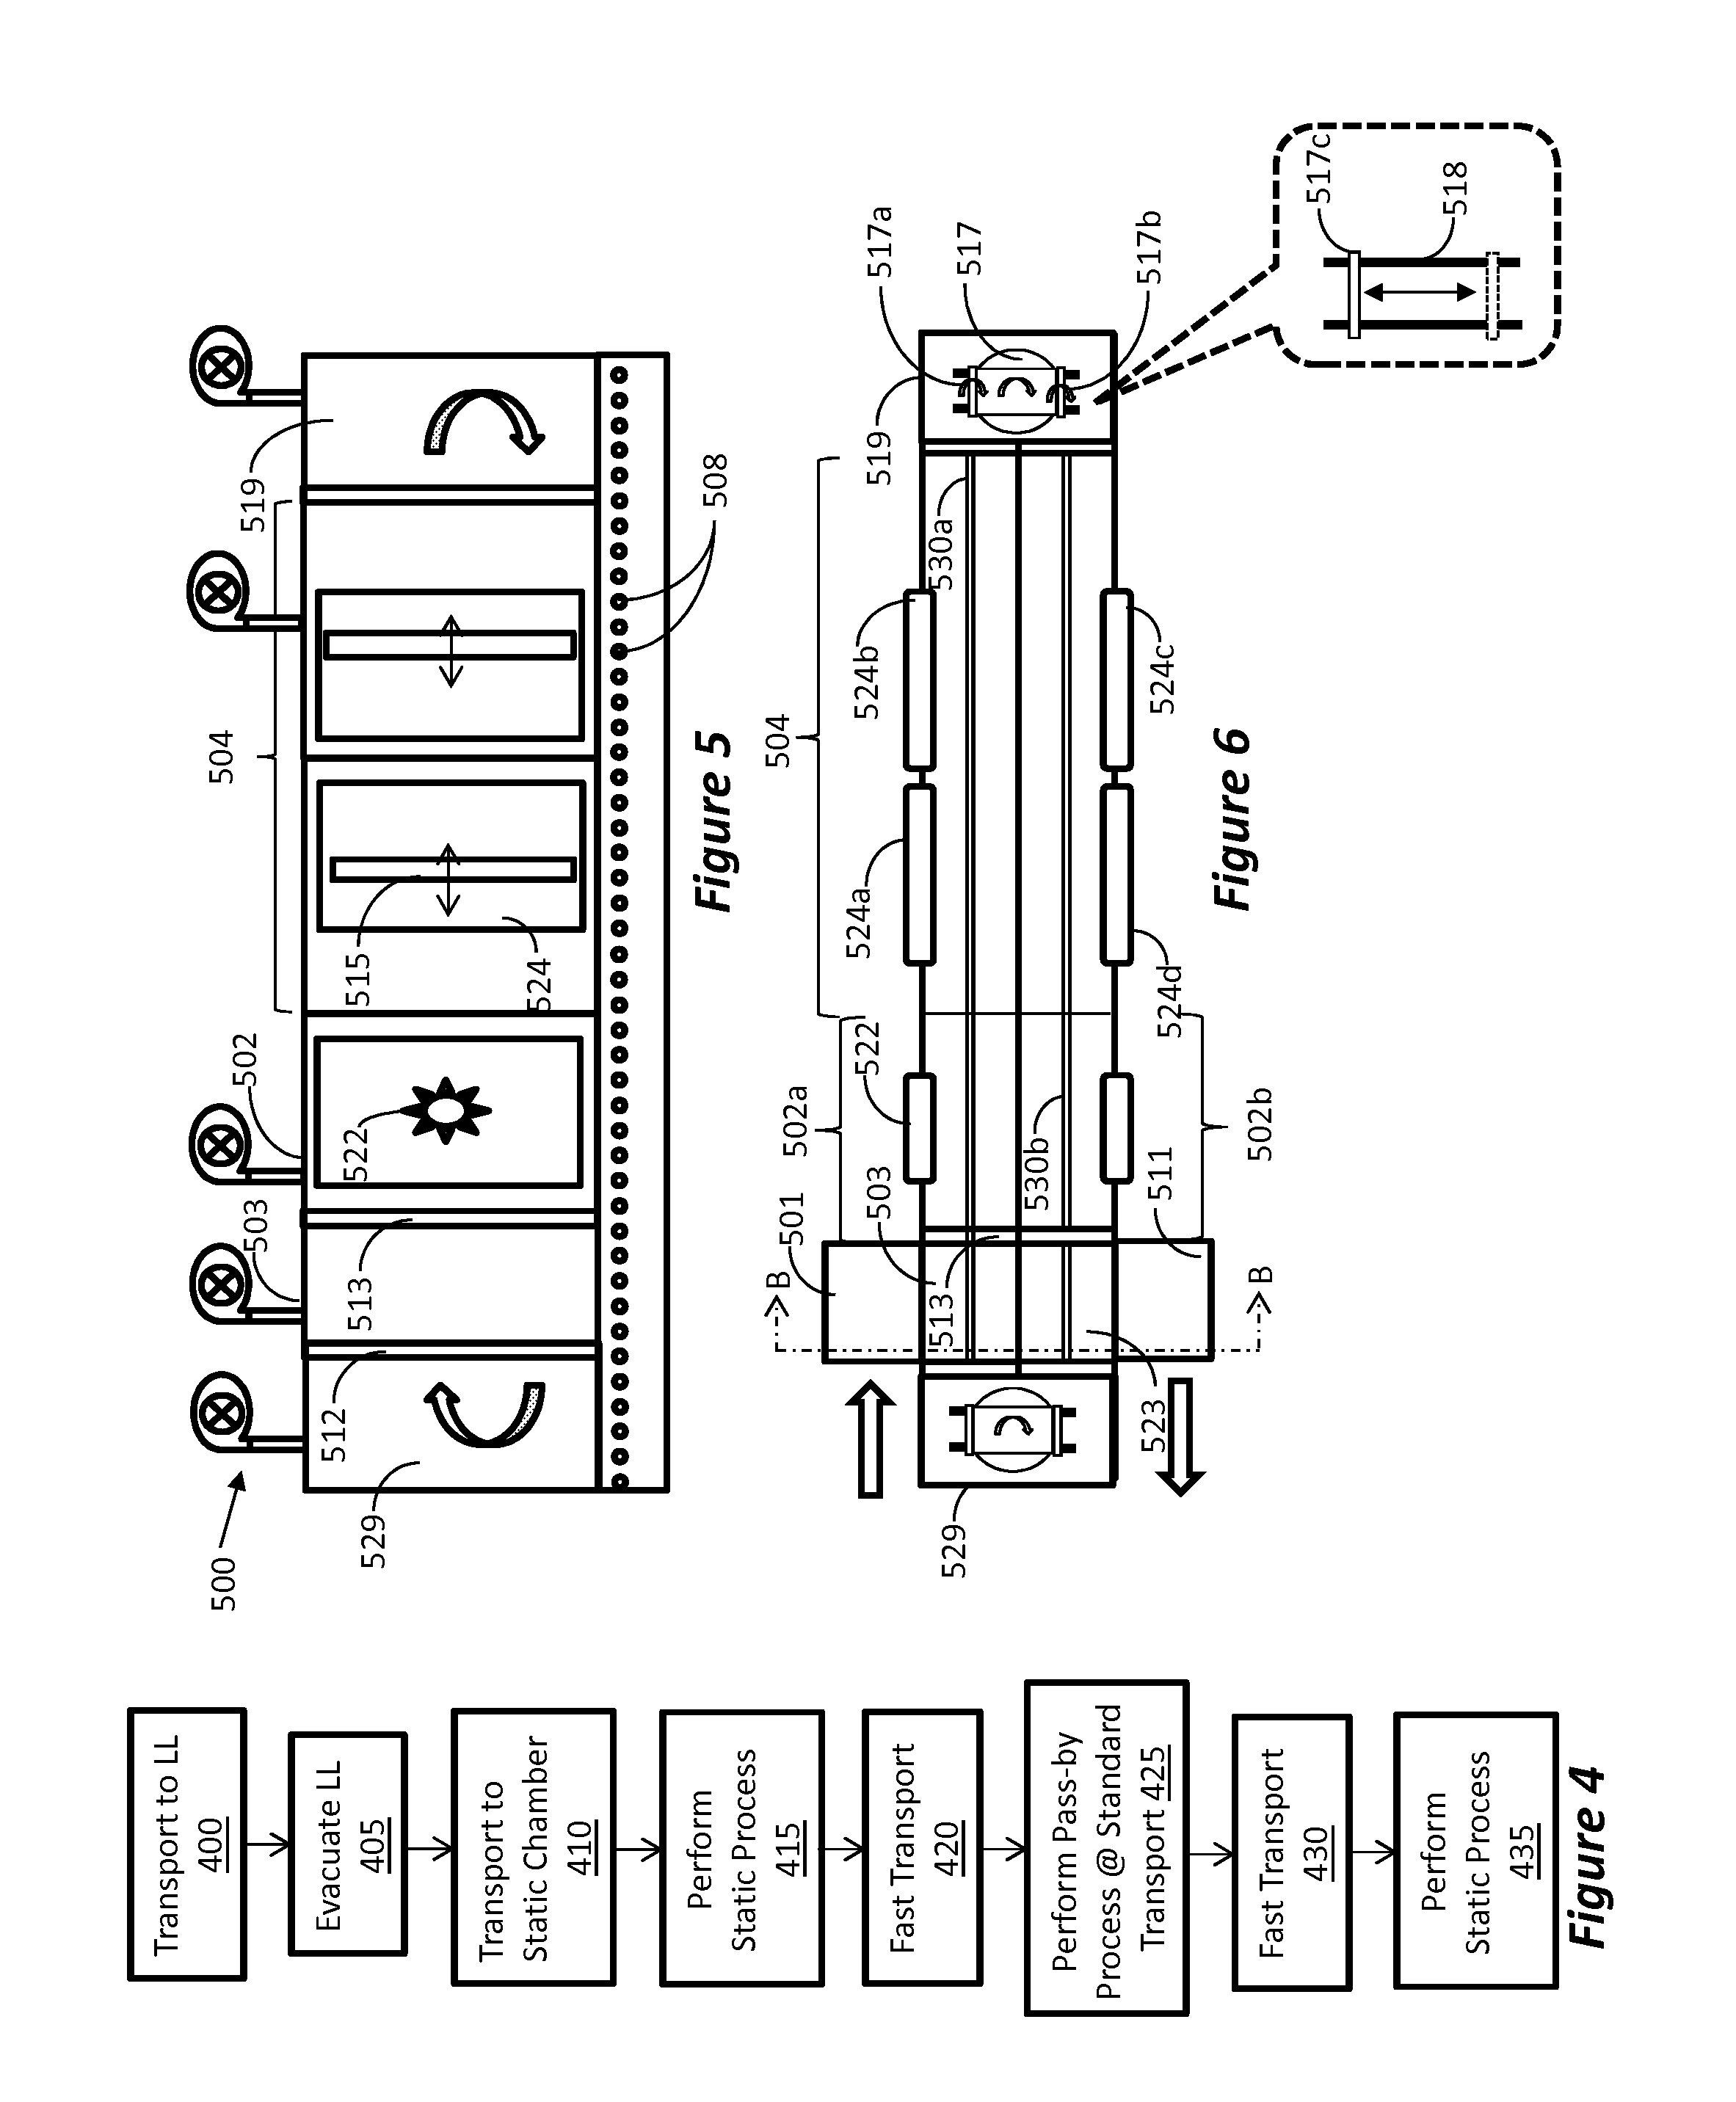 System architecture for combined static and pass-by processing